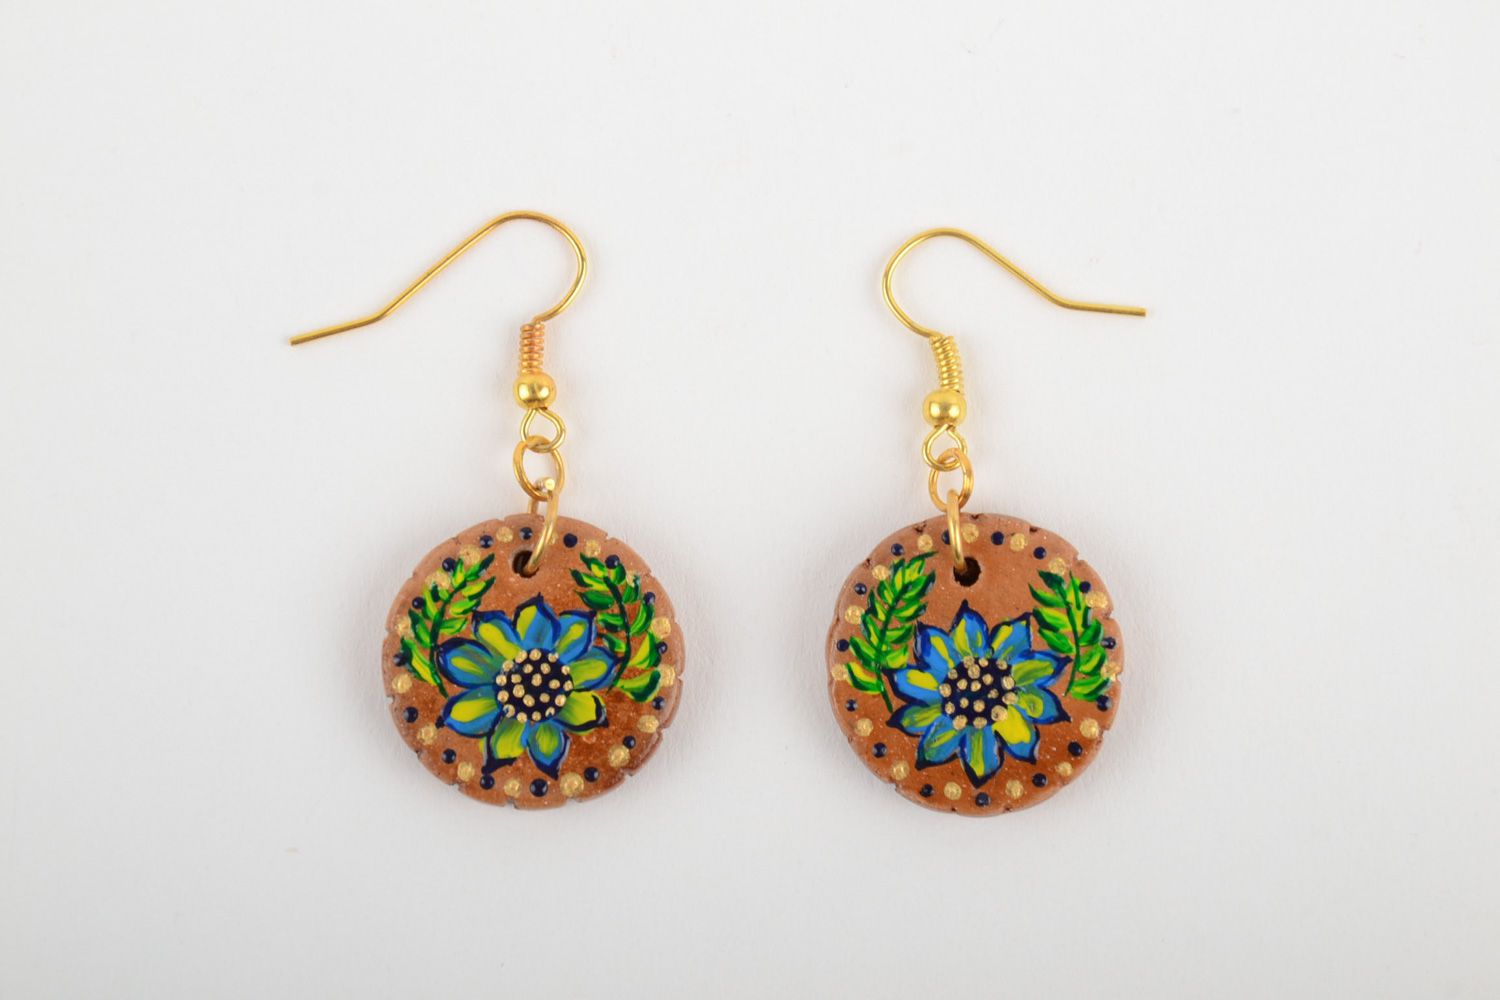 Handmade festive round ceramic earrings painted with acrylics in ethnic style photo 5